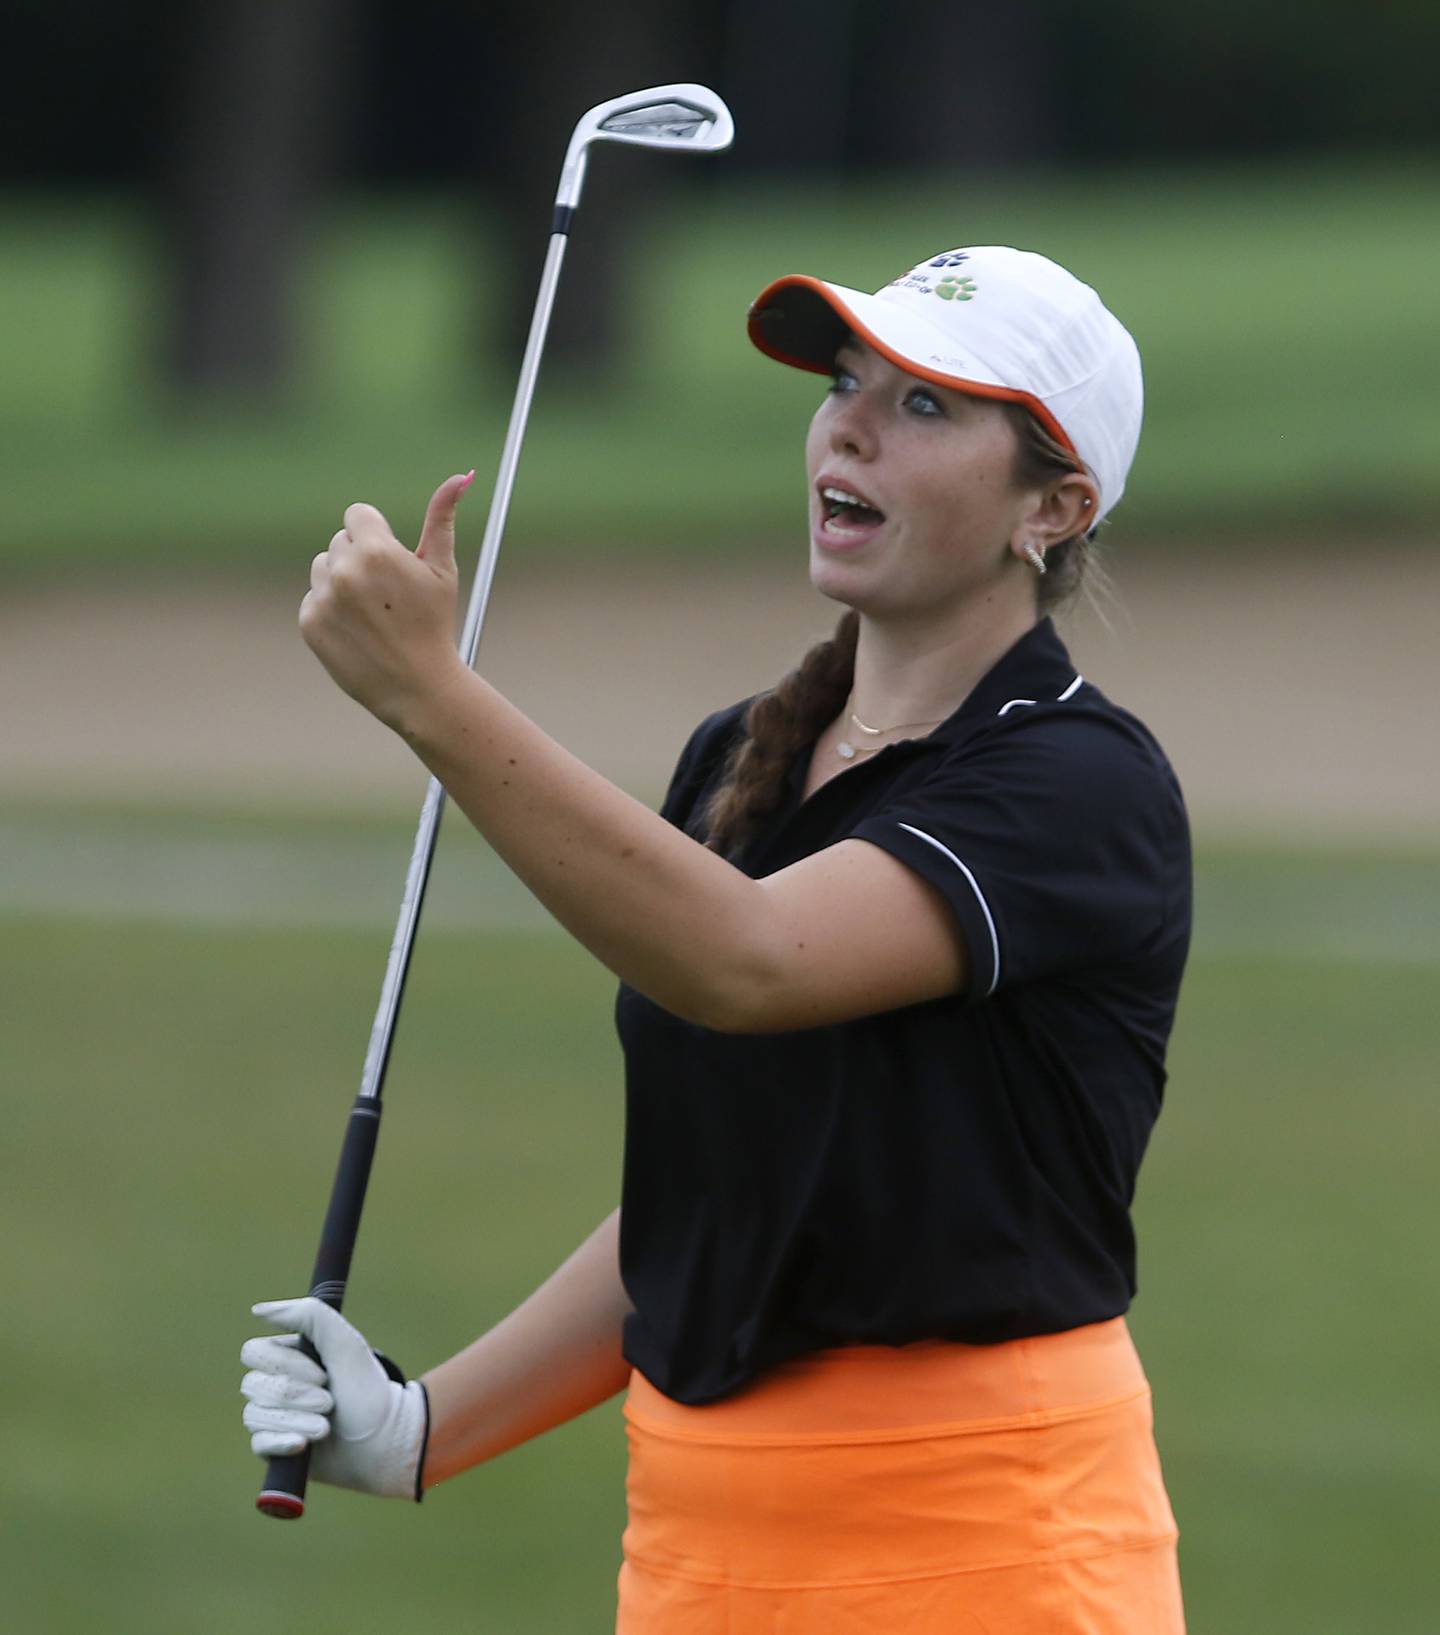 Crystal Lake Co-op’s Delaney Medlyn tries to coax her ball on the16th hole during the Fox Valley Conference Girls Golf Tournament Wednesday, Sept. 20, 2023, at Crystal Woods Golf Club in Woodstock.